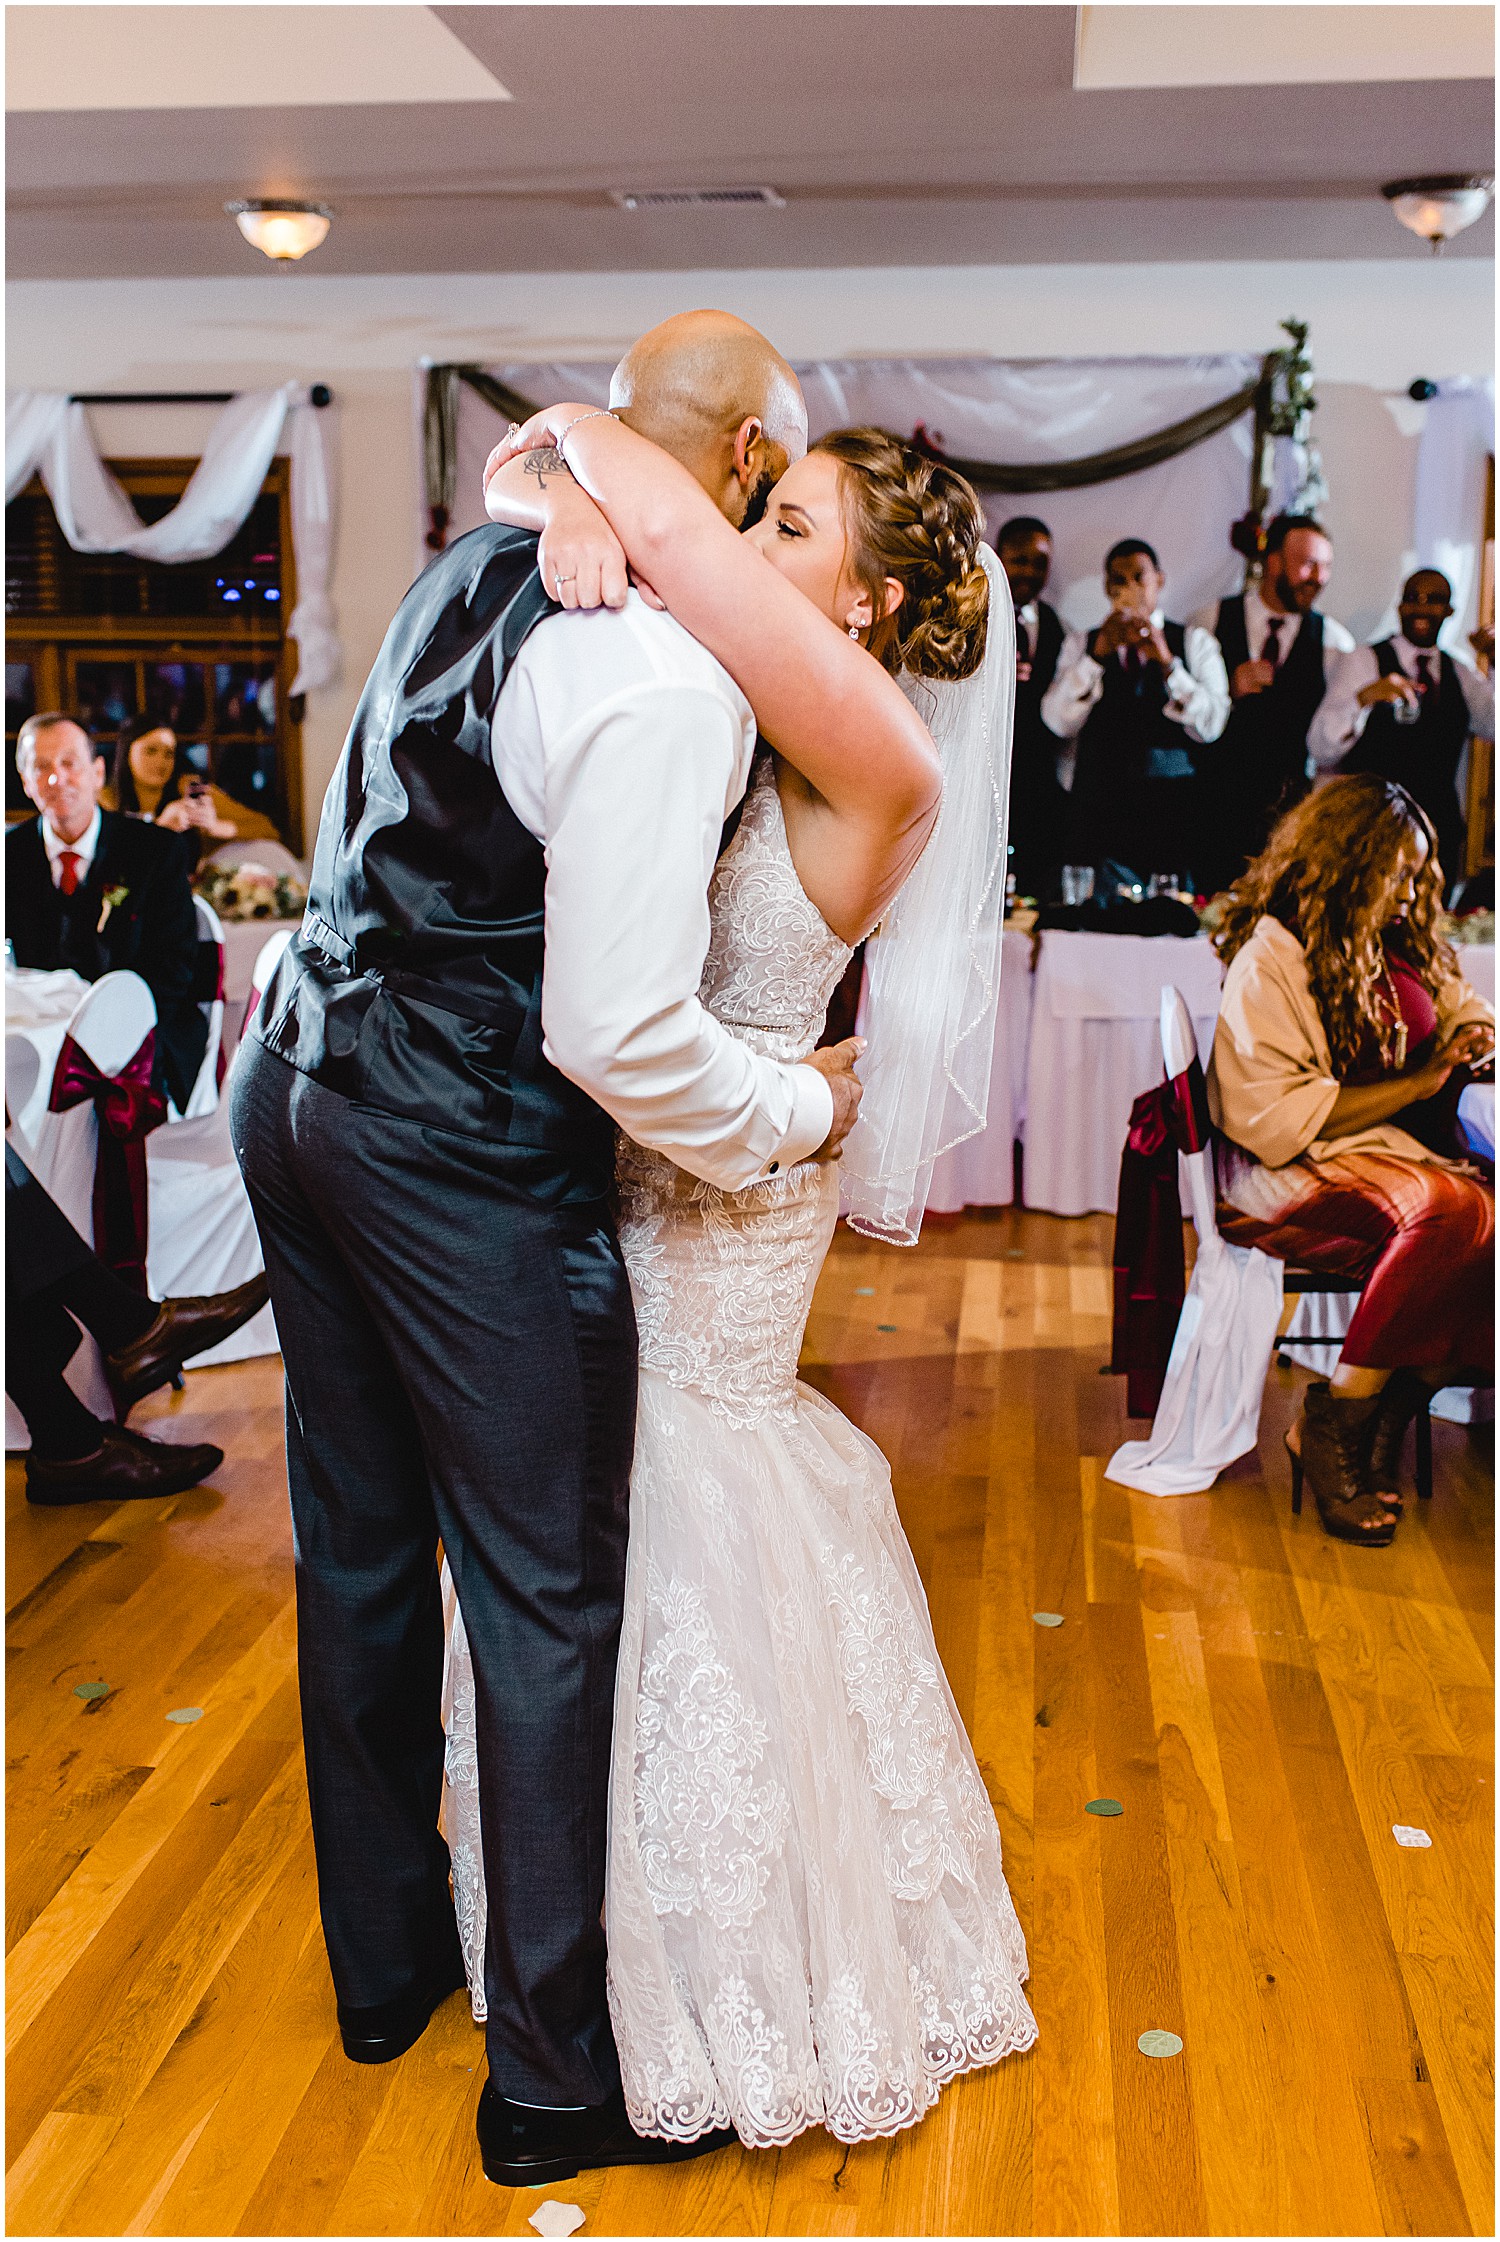 bride and groom first dance during wedding reception at Canterbury hill winery